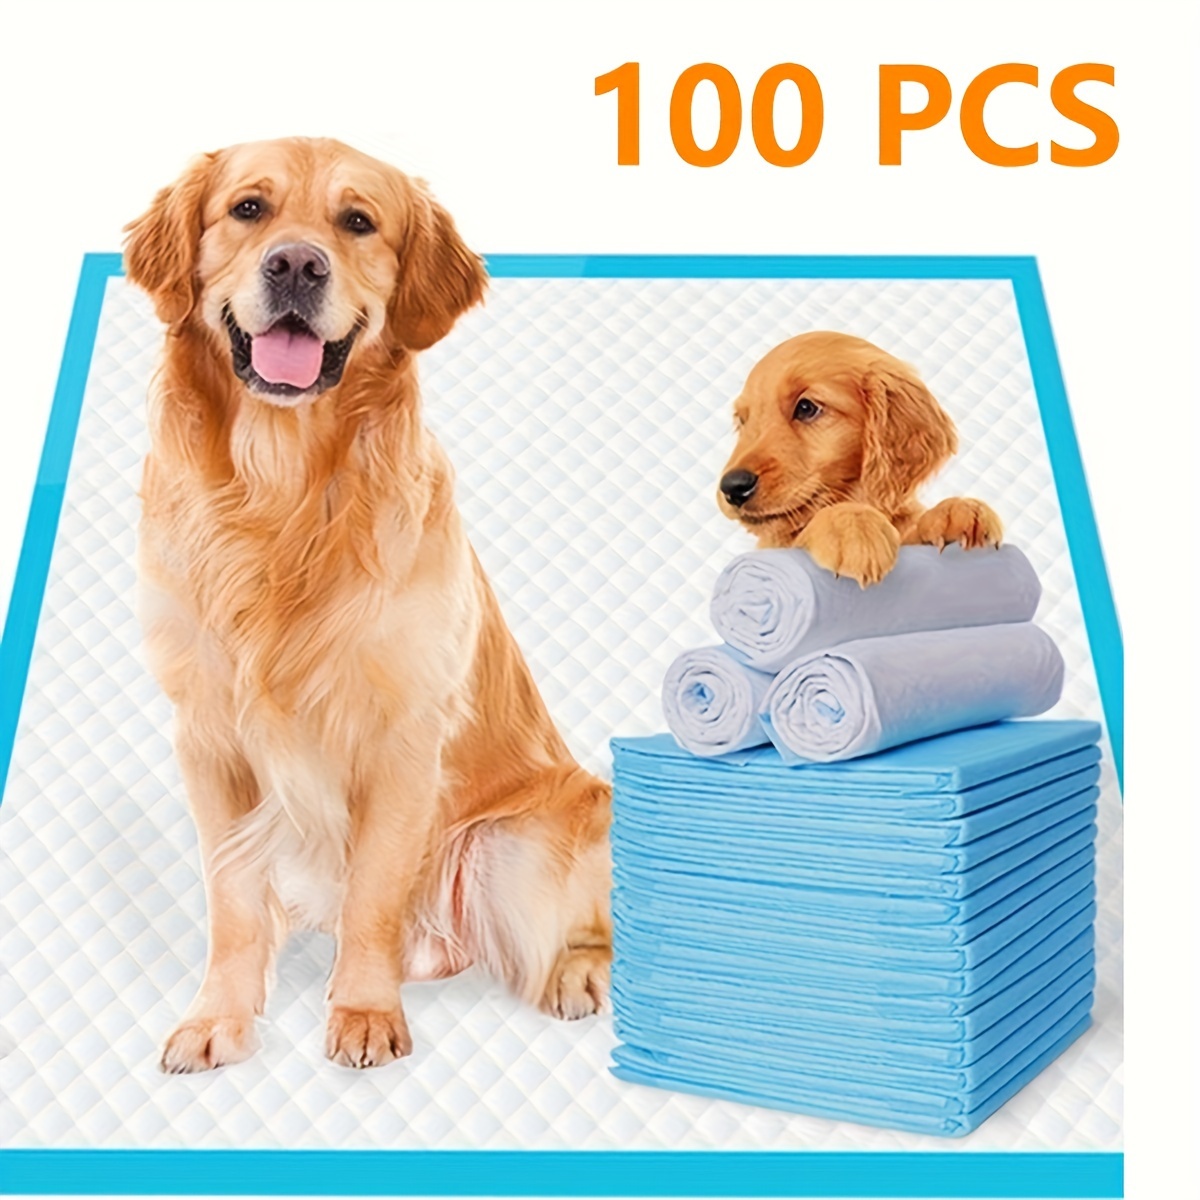 

100 Pcs Dog Training Pads, Pee Pads, 22" X 22" Training Pads, 100 Count Disposable Puppy Pee Pads, Quick Absorb And Odor Control, Manufactured In Us